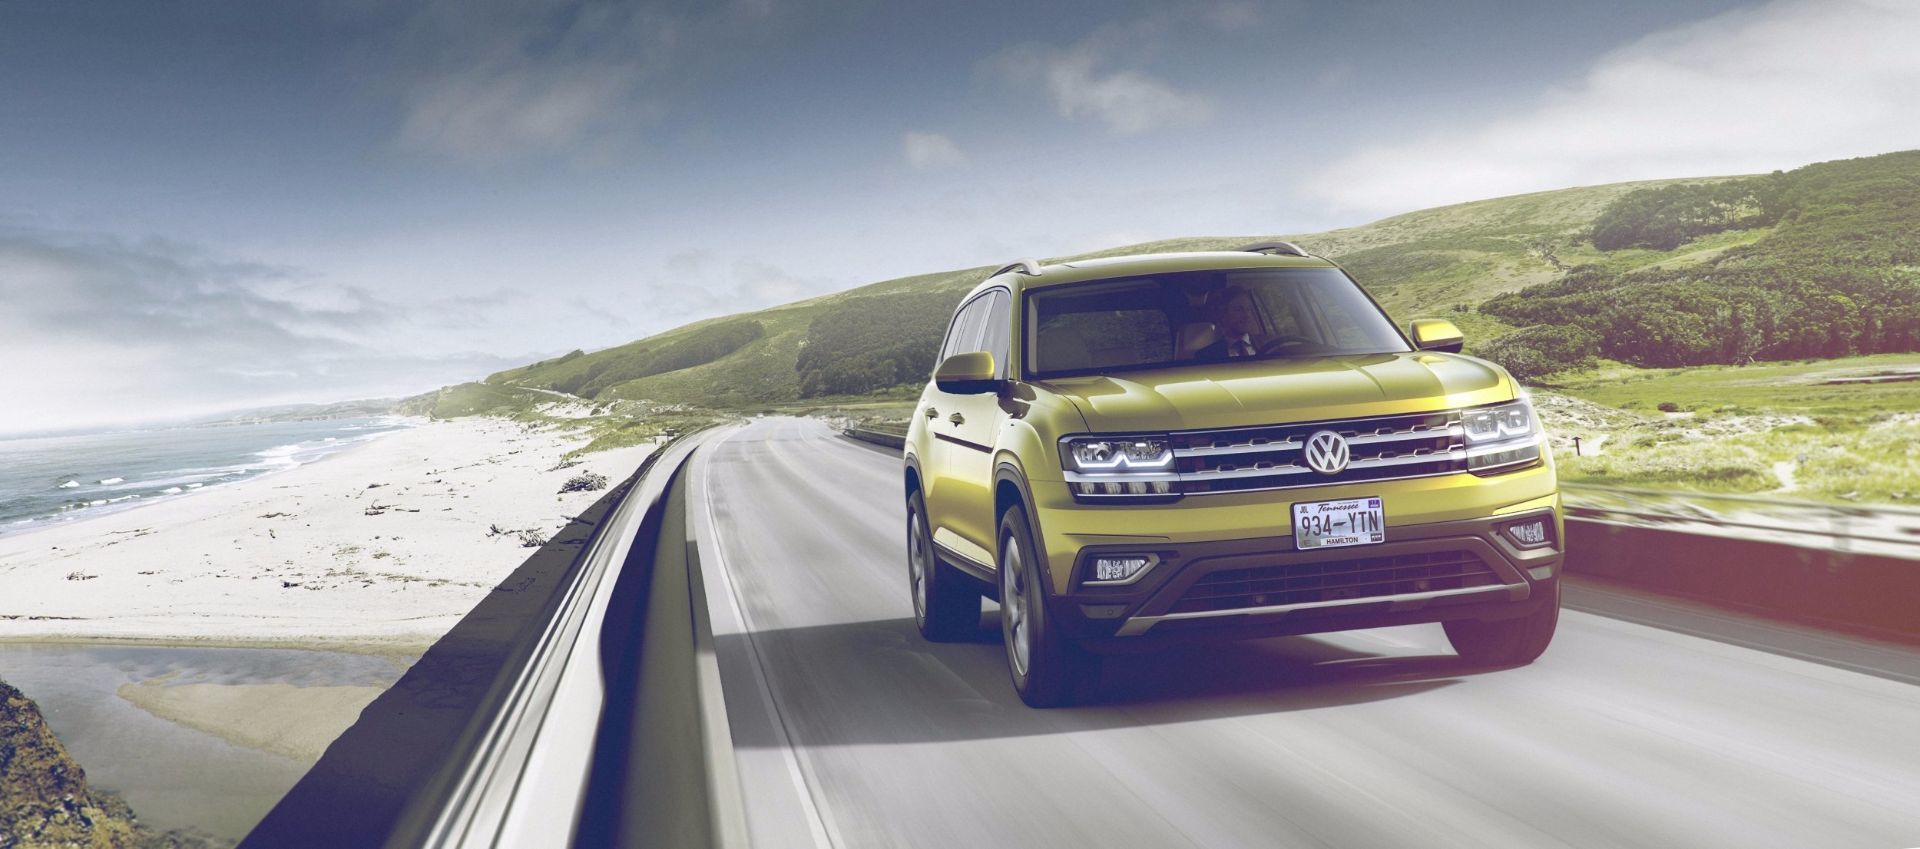 The 2018 Volkswagen Atlas is scheduled to be available during summer 2017 !